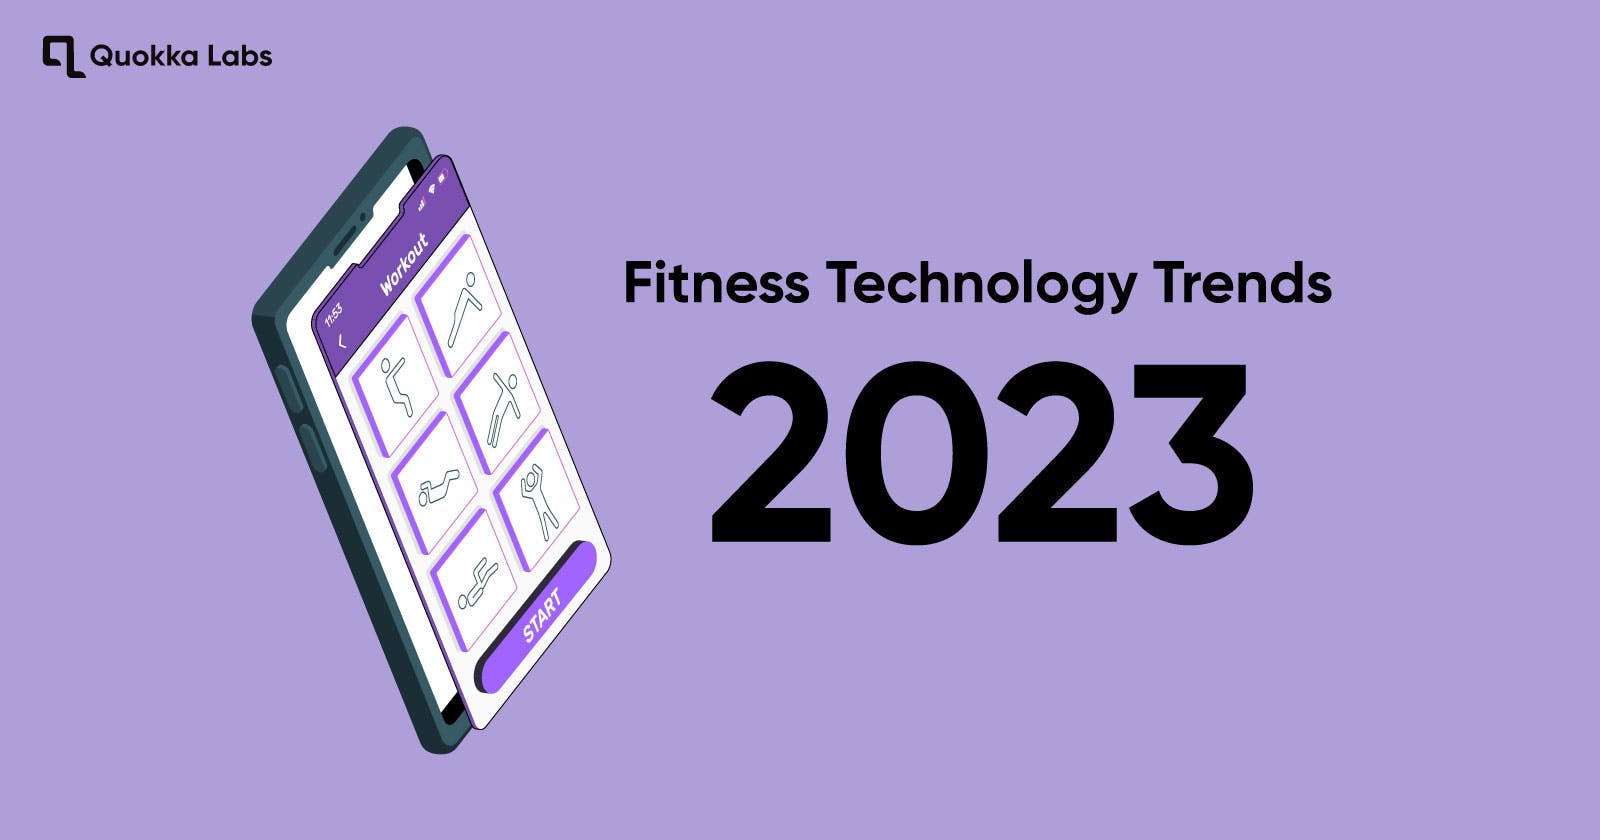 7 Fitness Technology Trends To Watch In 2023